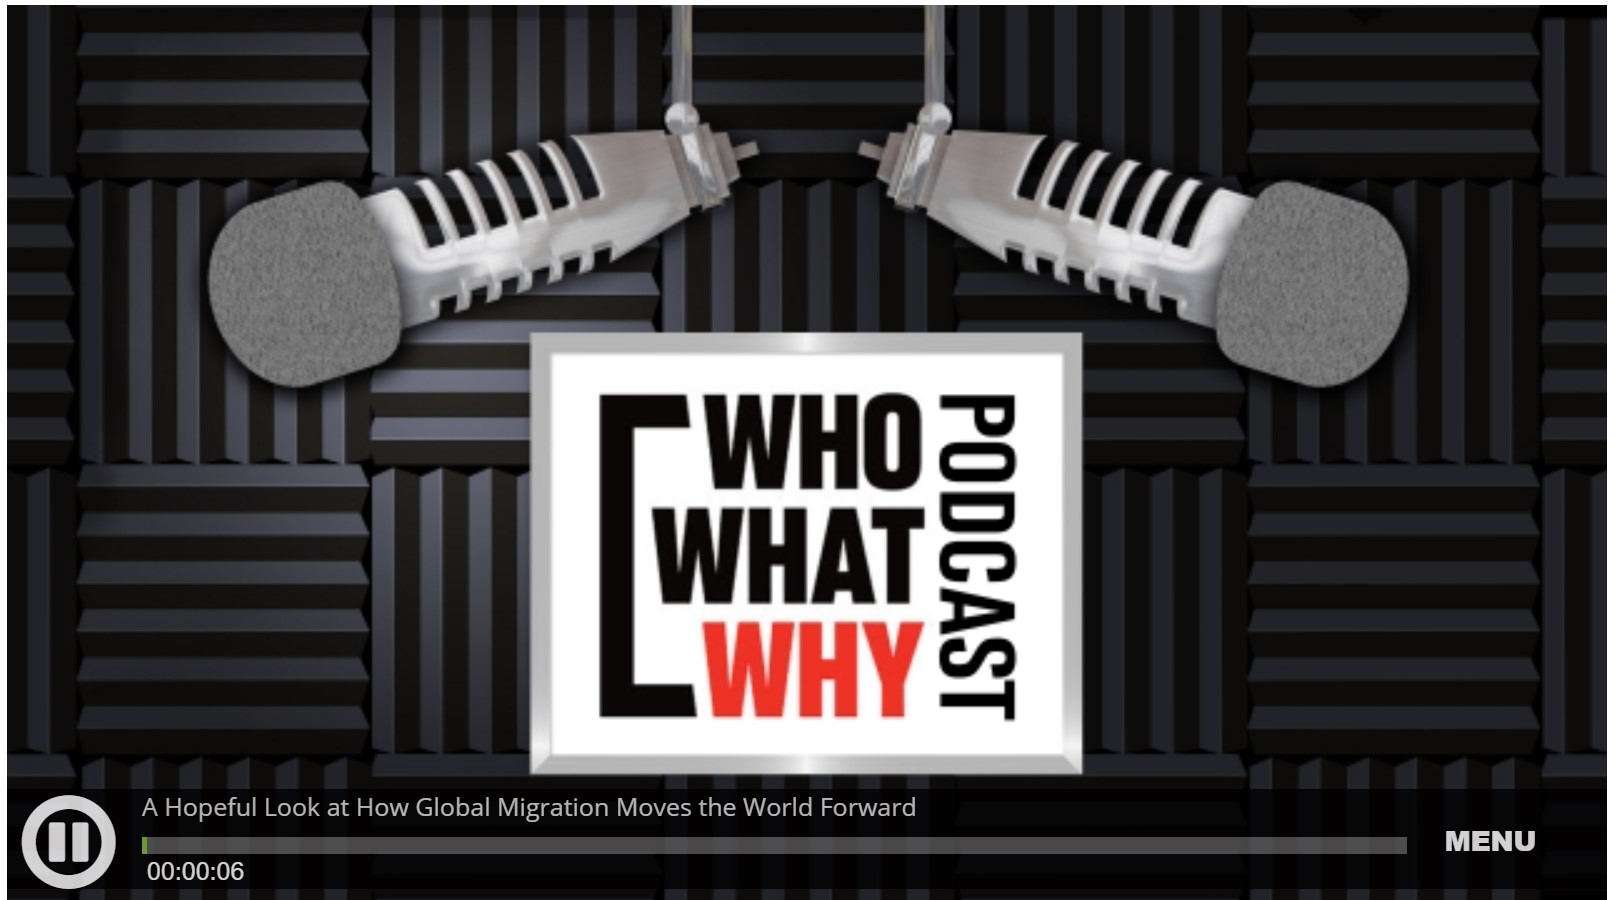 A Hopeful Look at How Global Migration Moves the World Forward